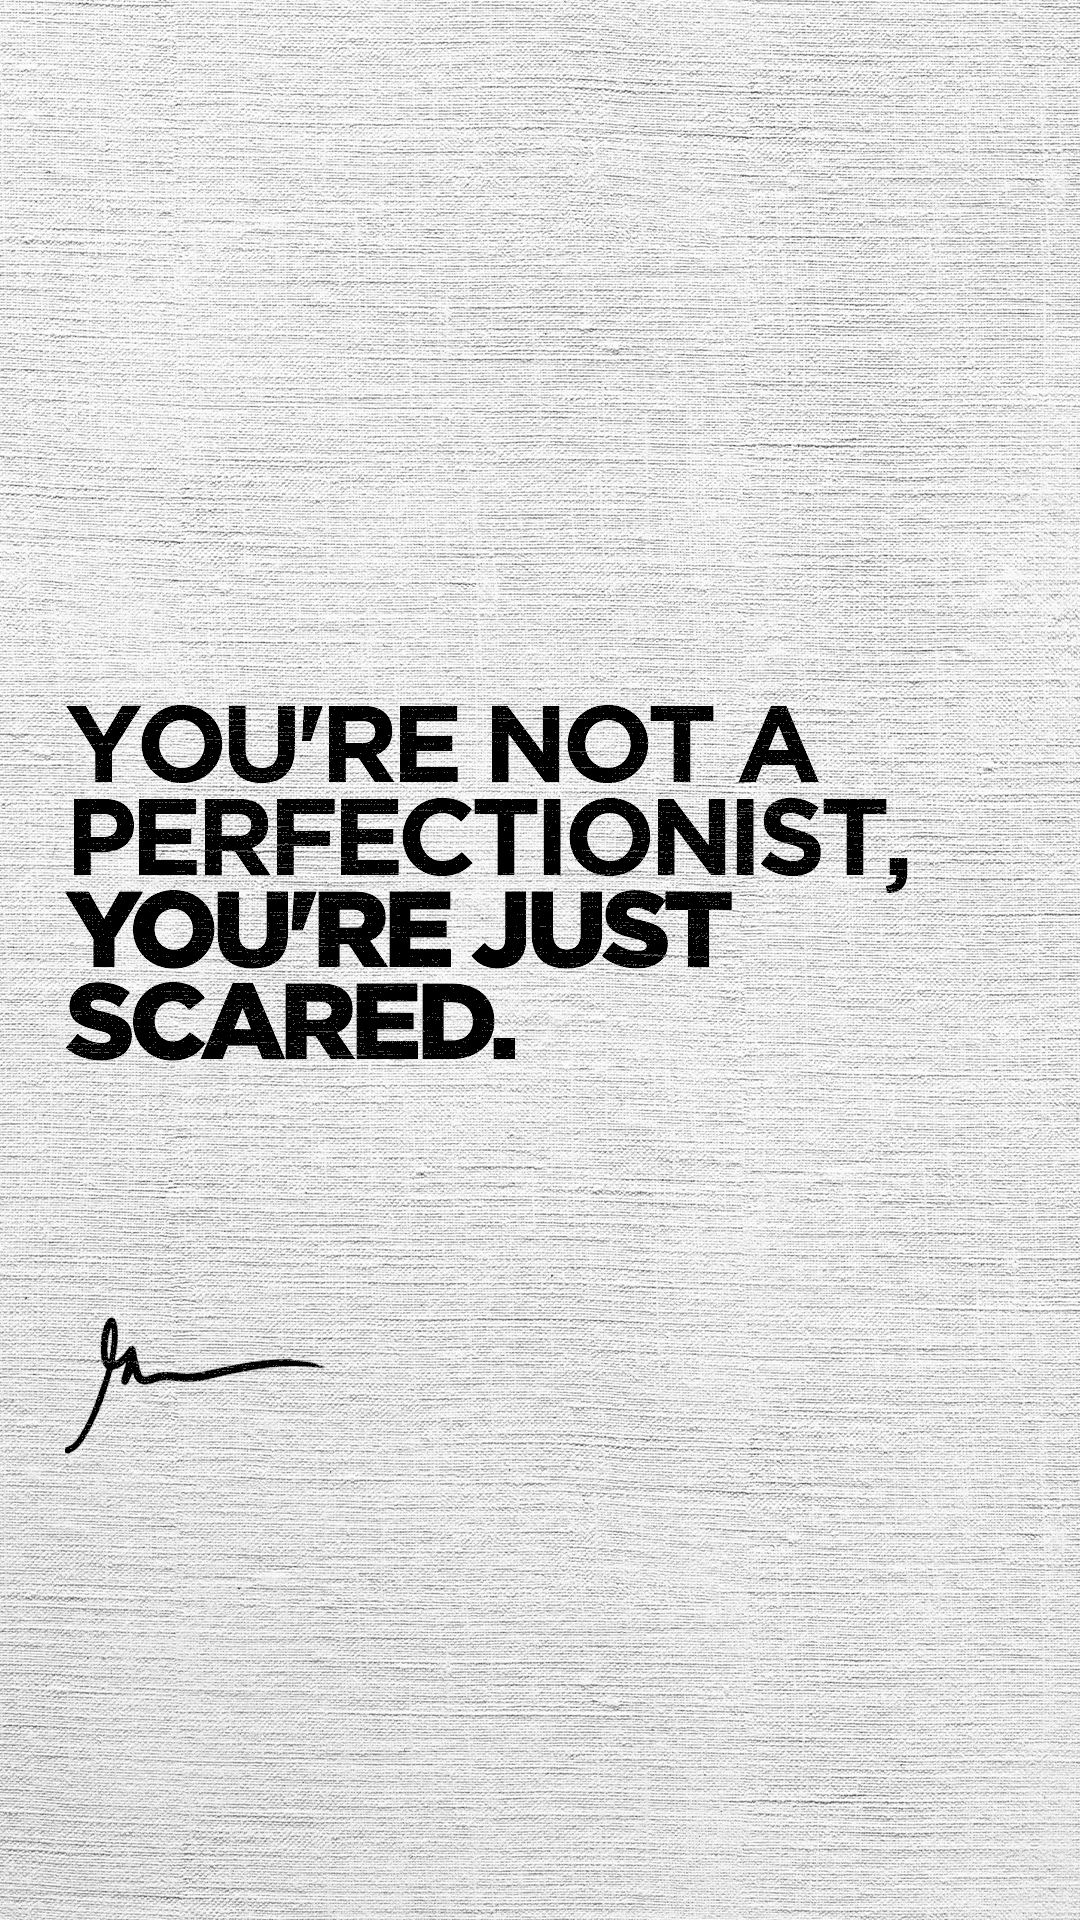 You're not a perfectionist, you're just scared.